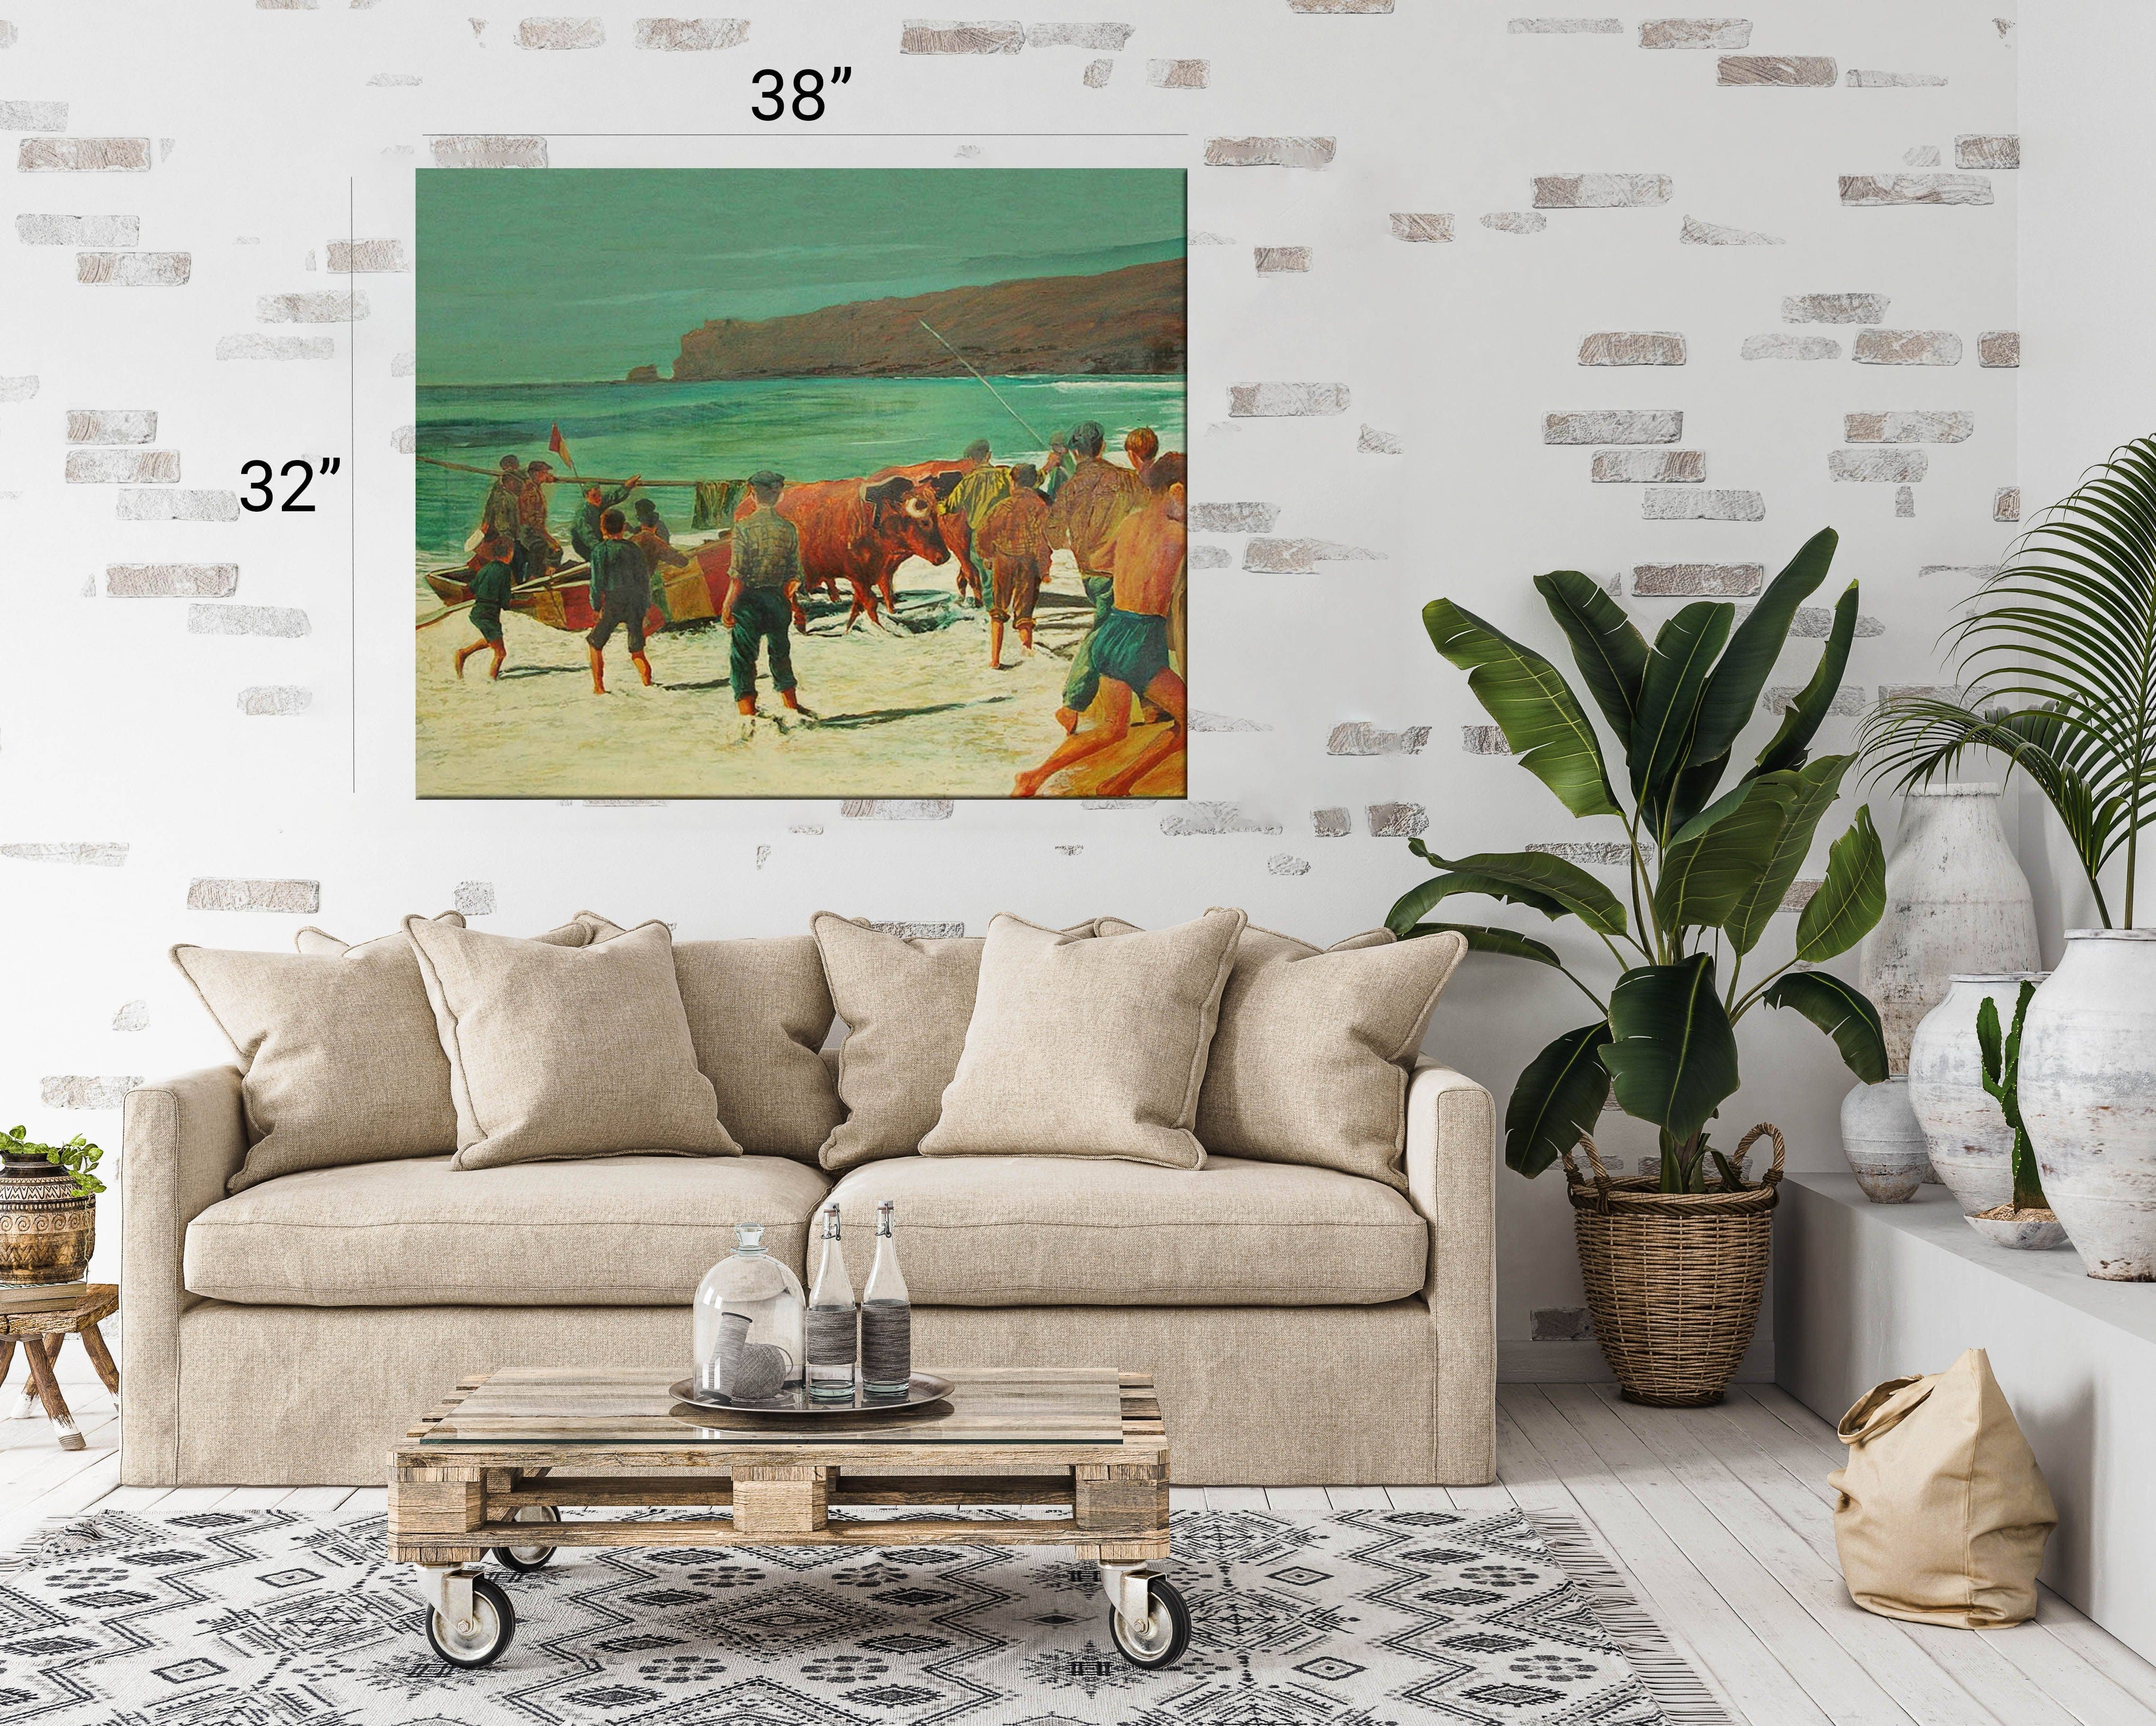 Painting of Nazaré displayed in a rustic living room on the wall